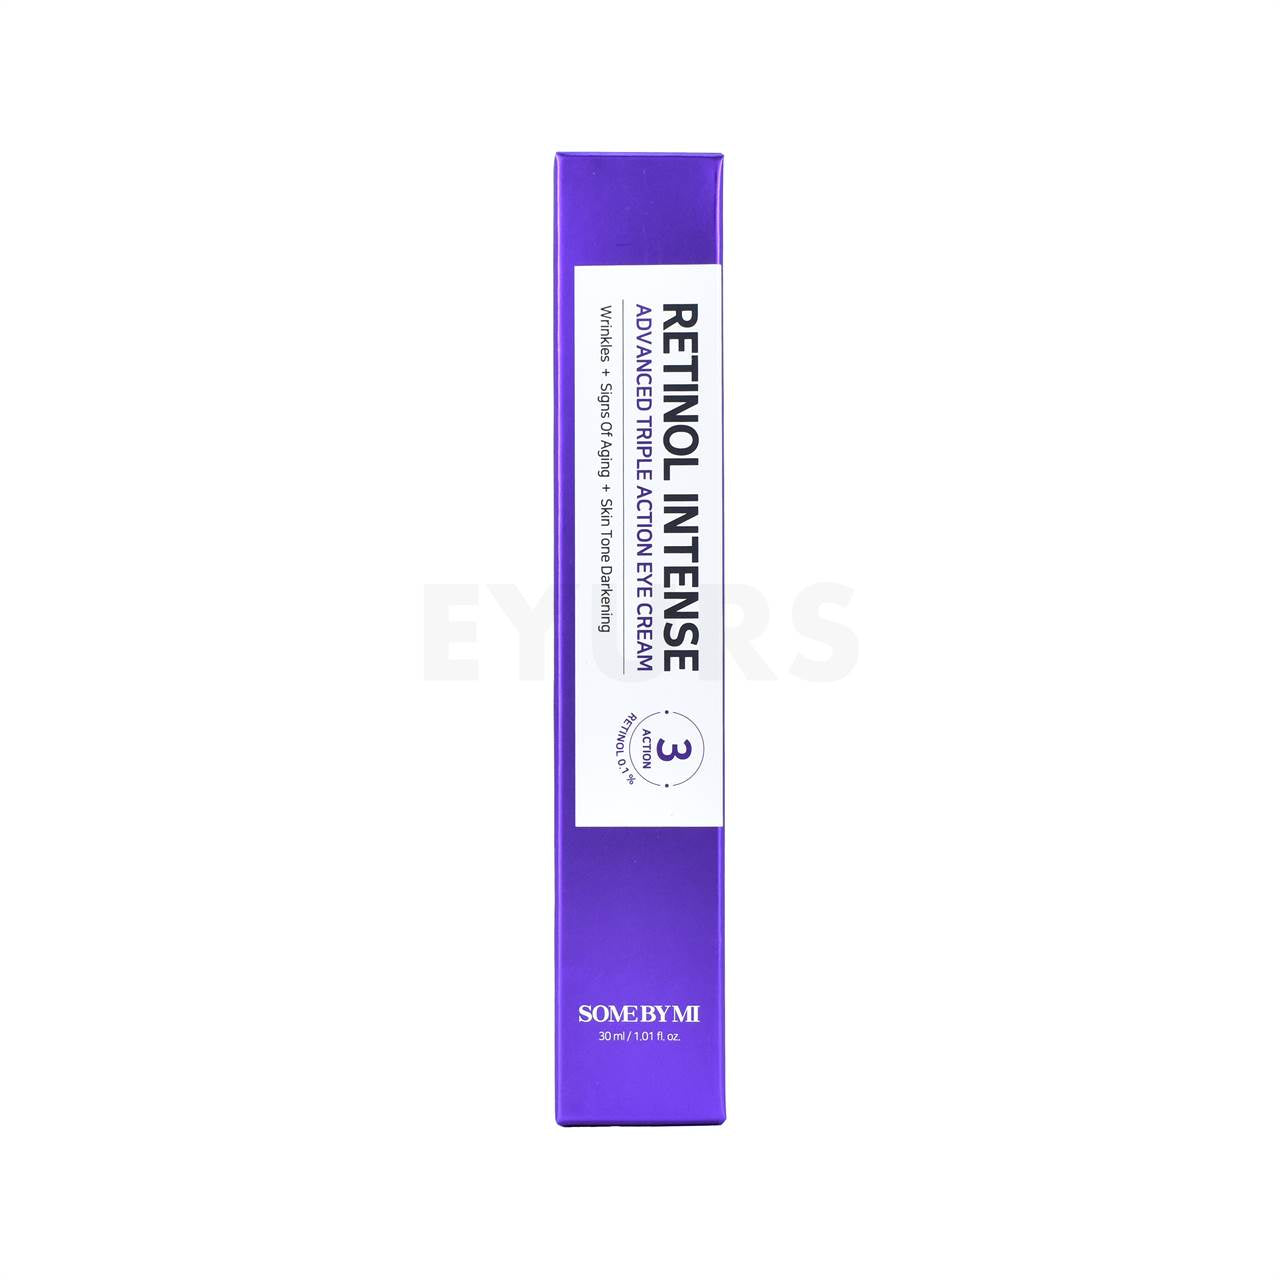 some by mi retinol intense advanced triple action eye cream front side packaging